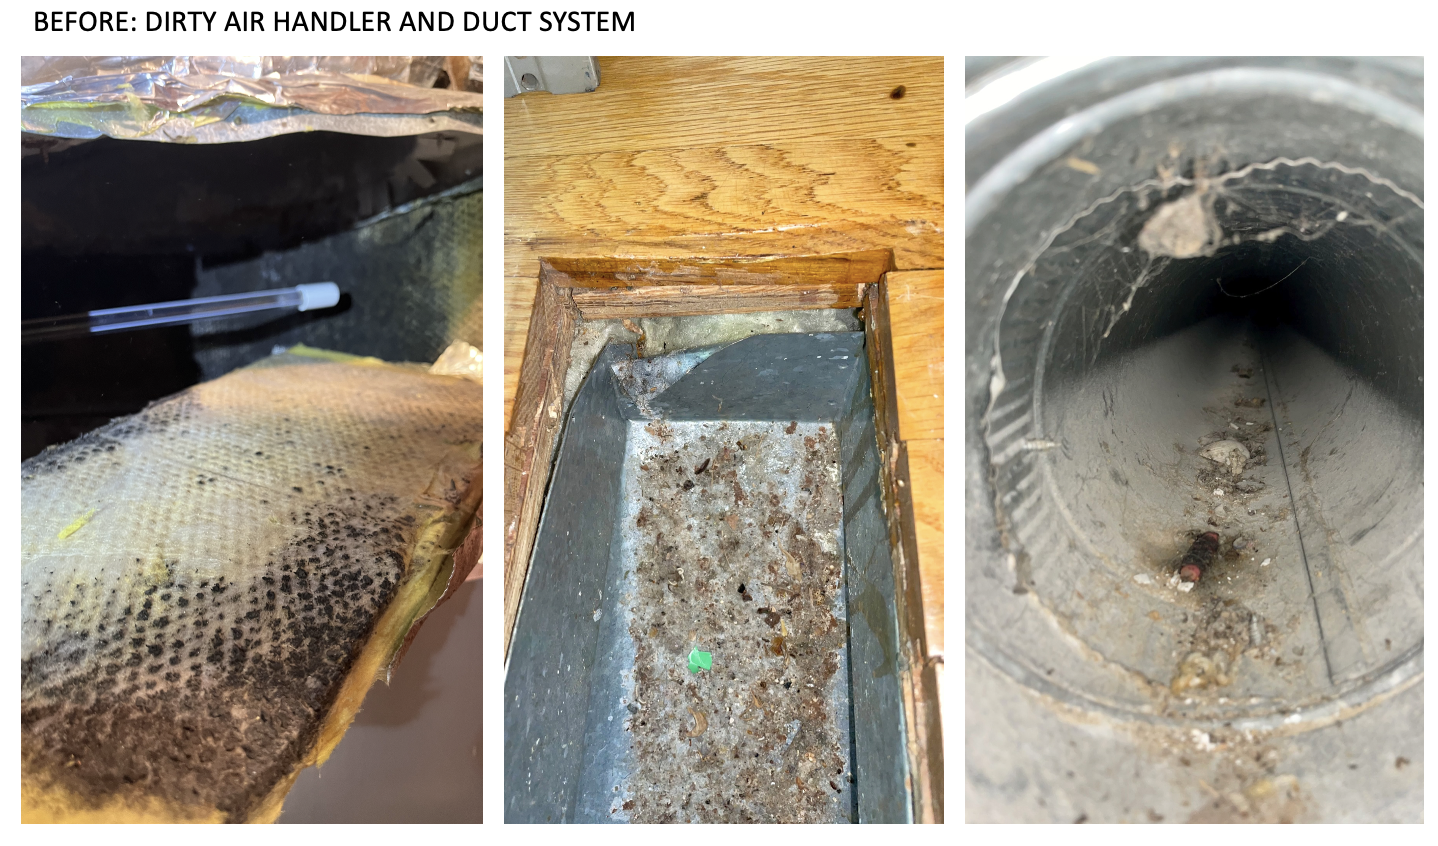 OLD HVAC SYSTEM - DIRY DUCTS